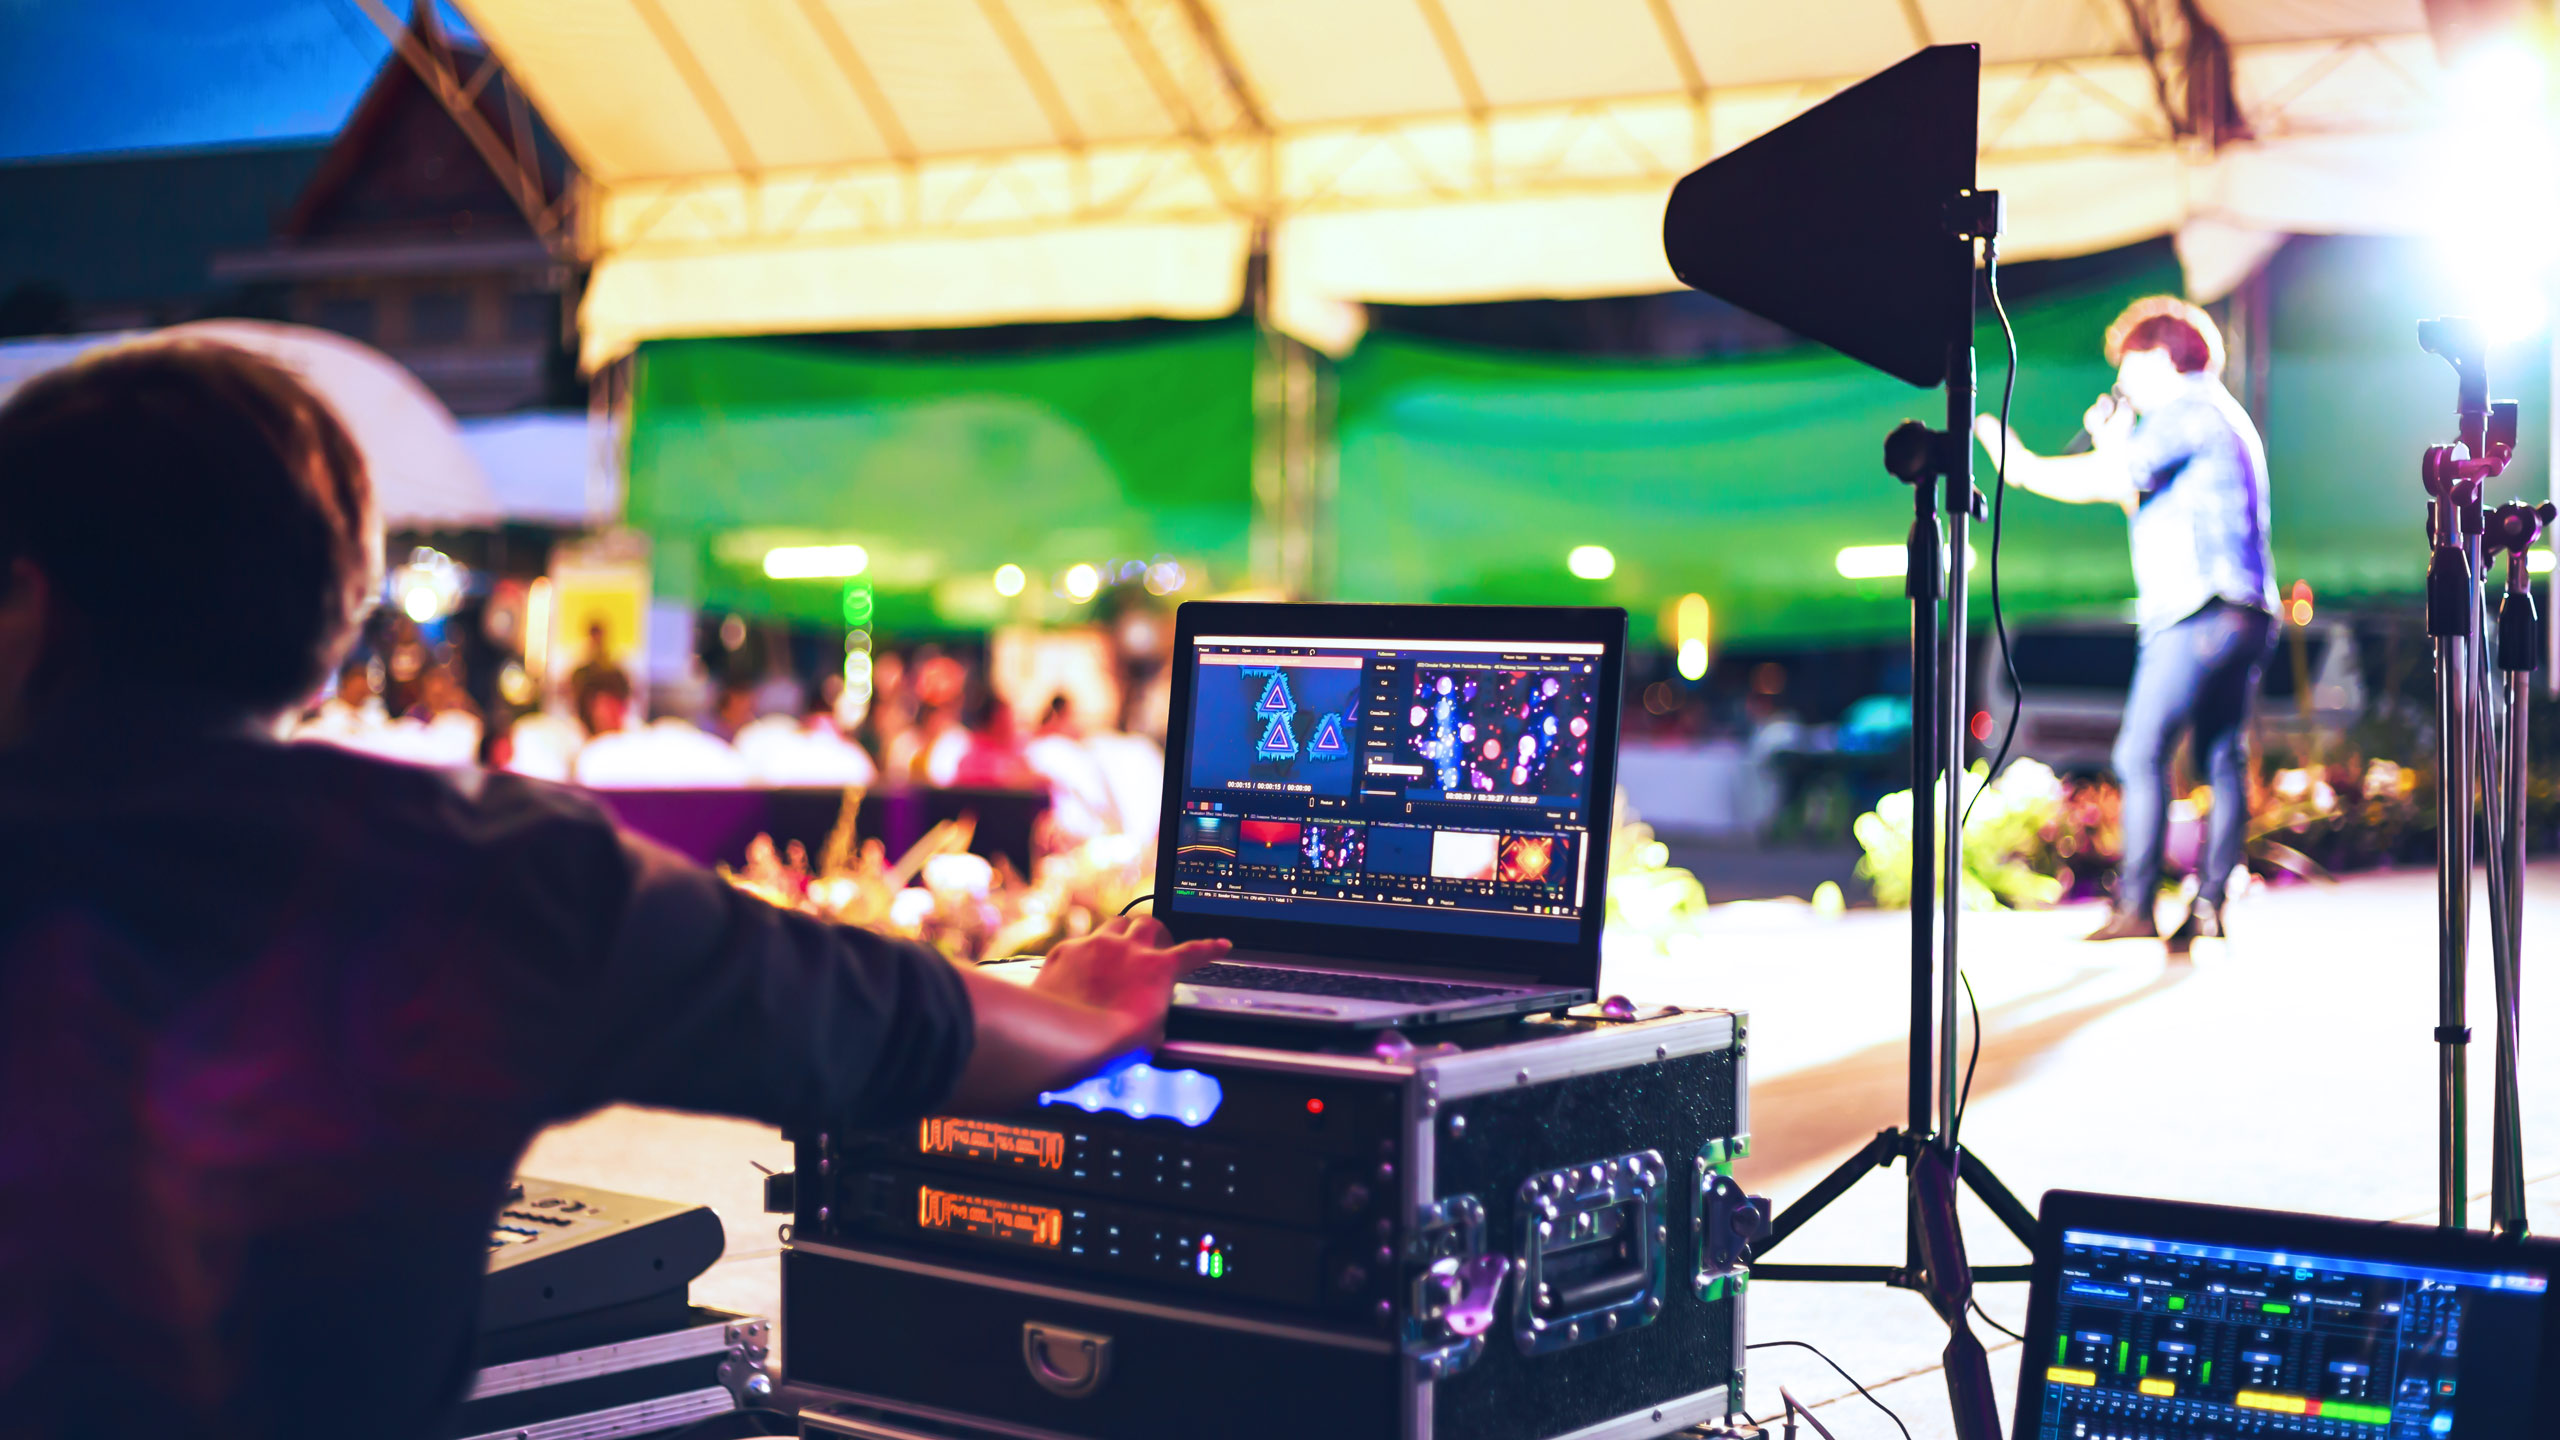 View from behind a technical operator working on a laptop with visual production software, with a blurred background featuring an on-stage performer and an audience at an outdoor event.